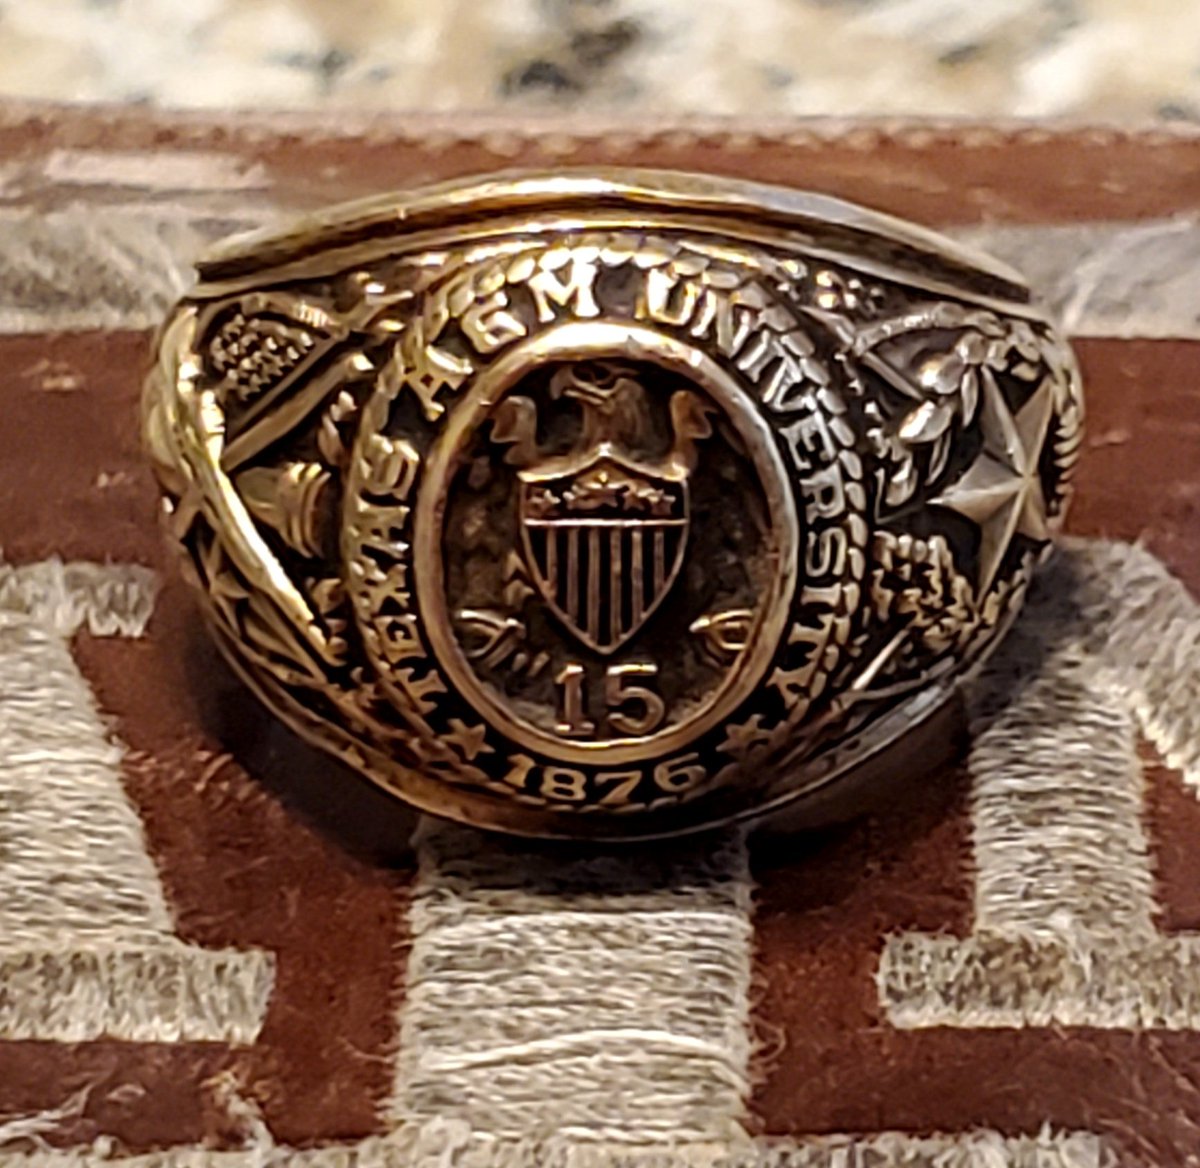 I know your #RingDay wasn't what you hoped for but, from an older fart than the ring would suggest, I want to sincerely congratulate everybody that got their pass into the Cool Kids Club. A wholehearted #GigEm for a wonderful and hard earned accomplishment 👍🏼